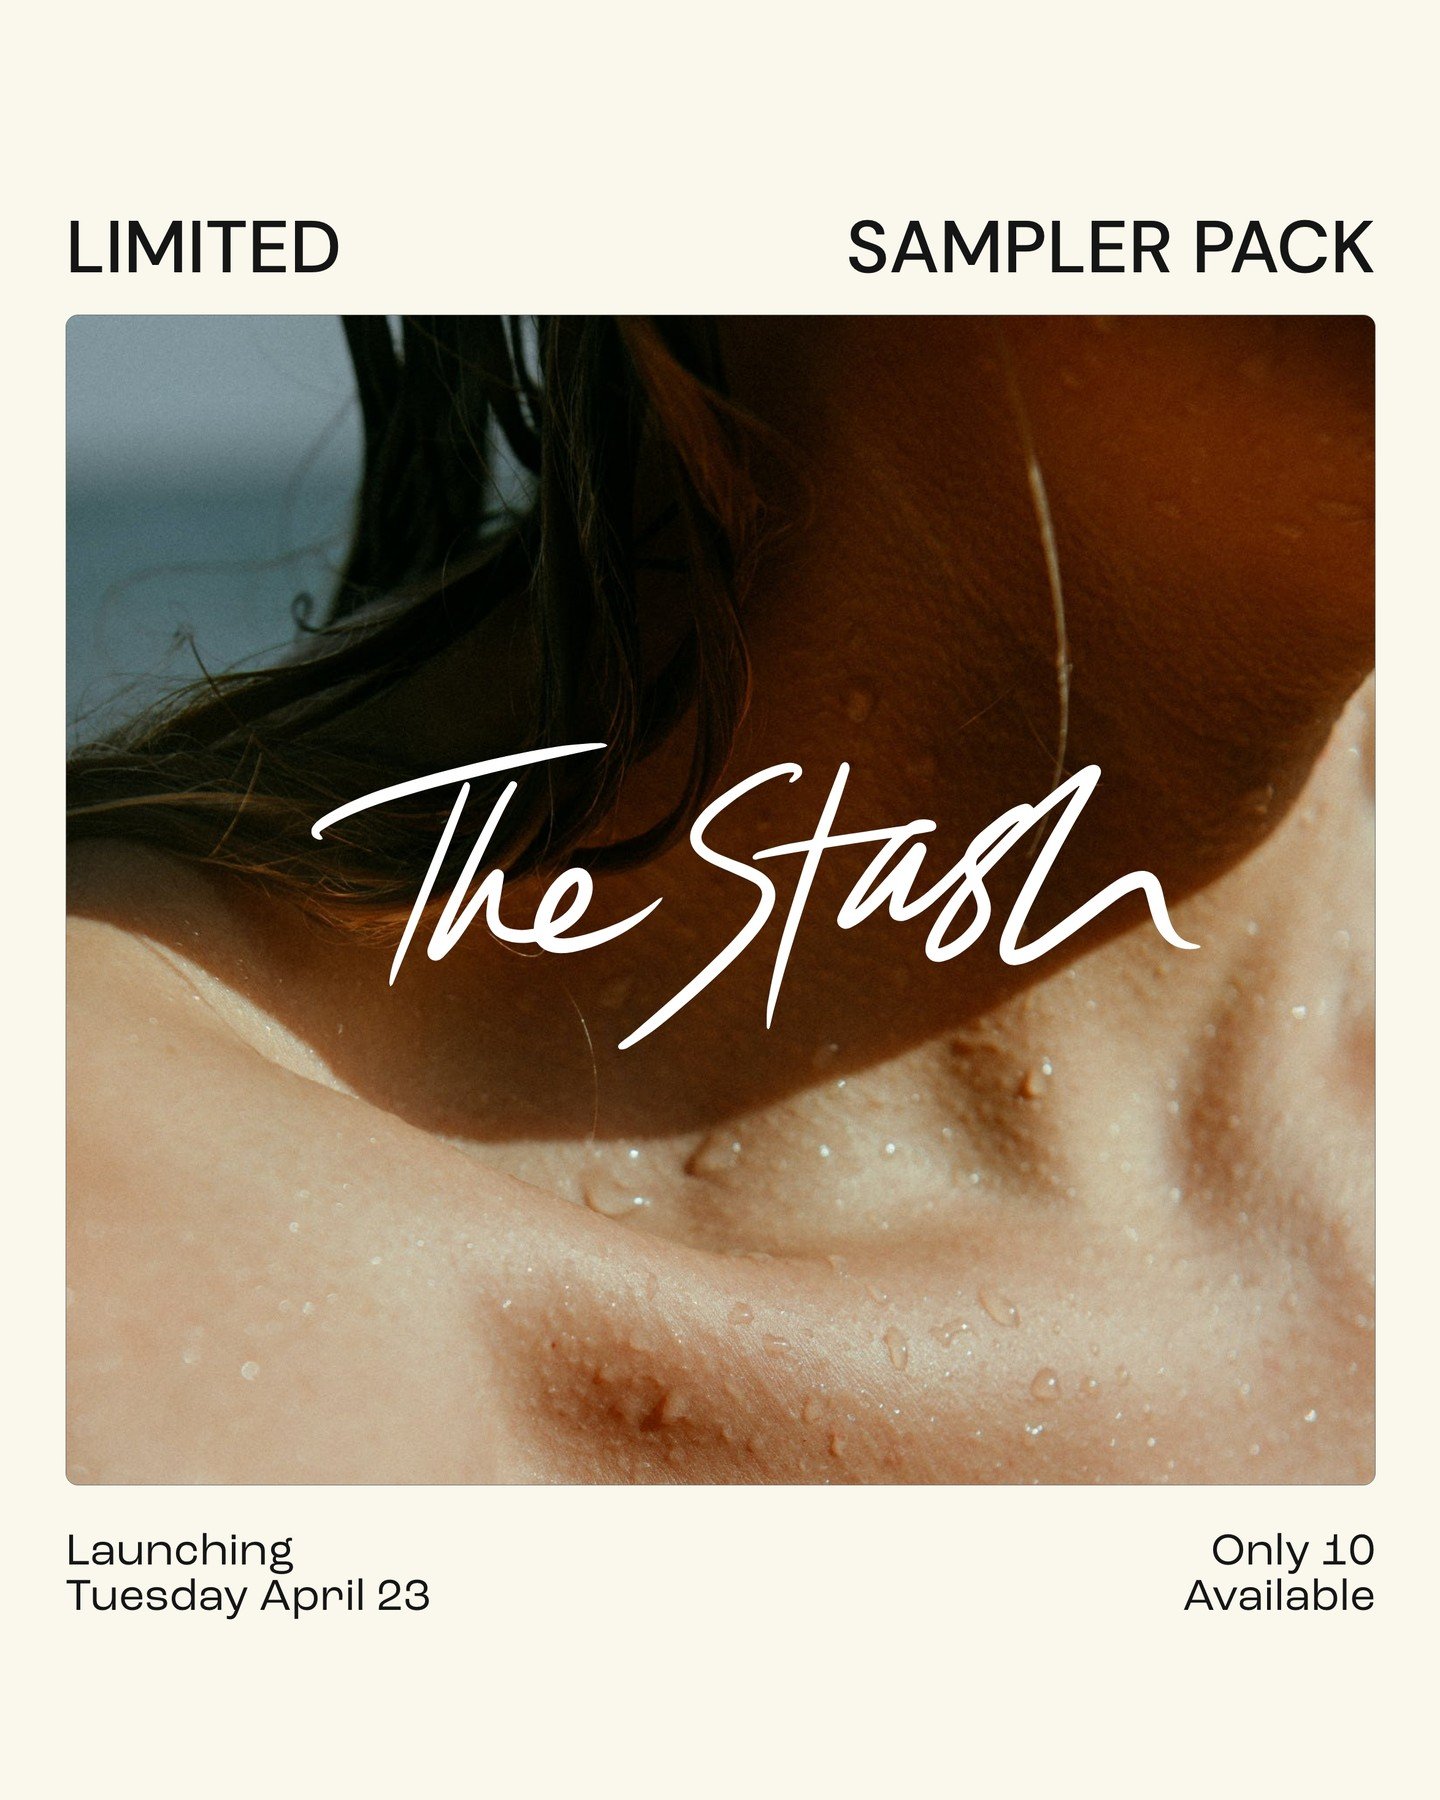 If you&rsquo;ve been eyeing up The Stash but you&rsquo;re not 100% sure you can invest in the full deal right now, I got something for ya. Meet, THE STASH SAMPLER PACK. 👩&zwj;💻

Half the collection, half the price. 😎

This offer is only available 